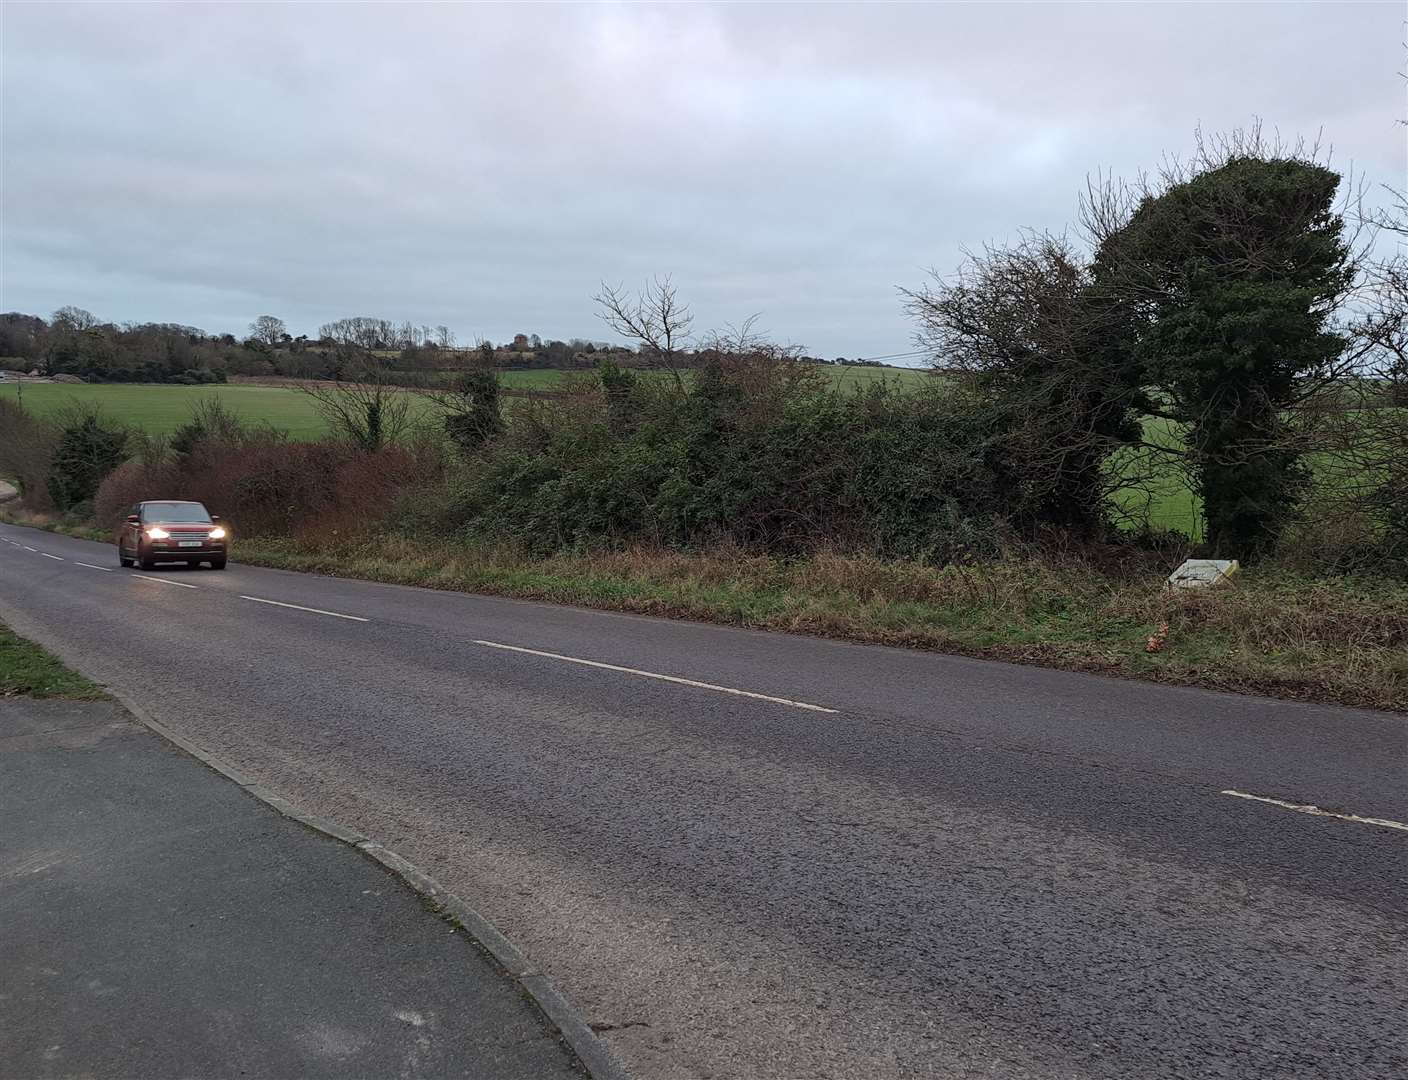 Station Road at St Margaret's-ar-Cliffe, which locals say needs a lower speed limit